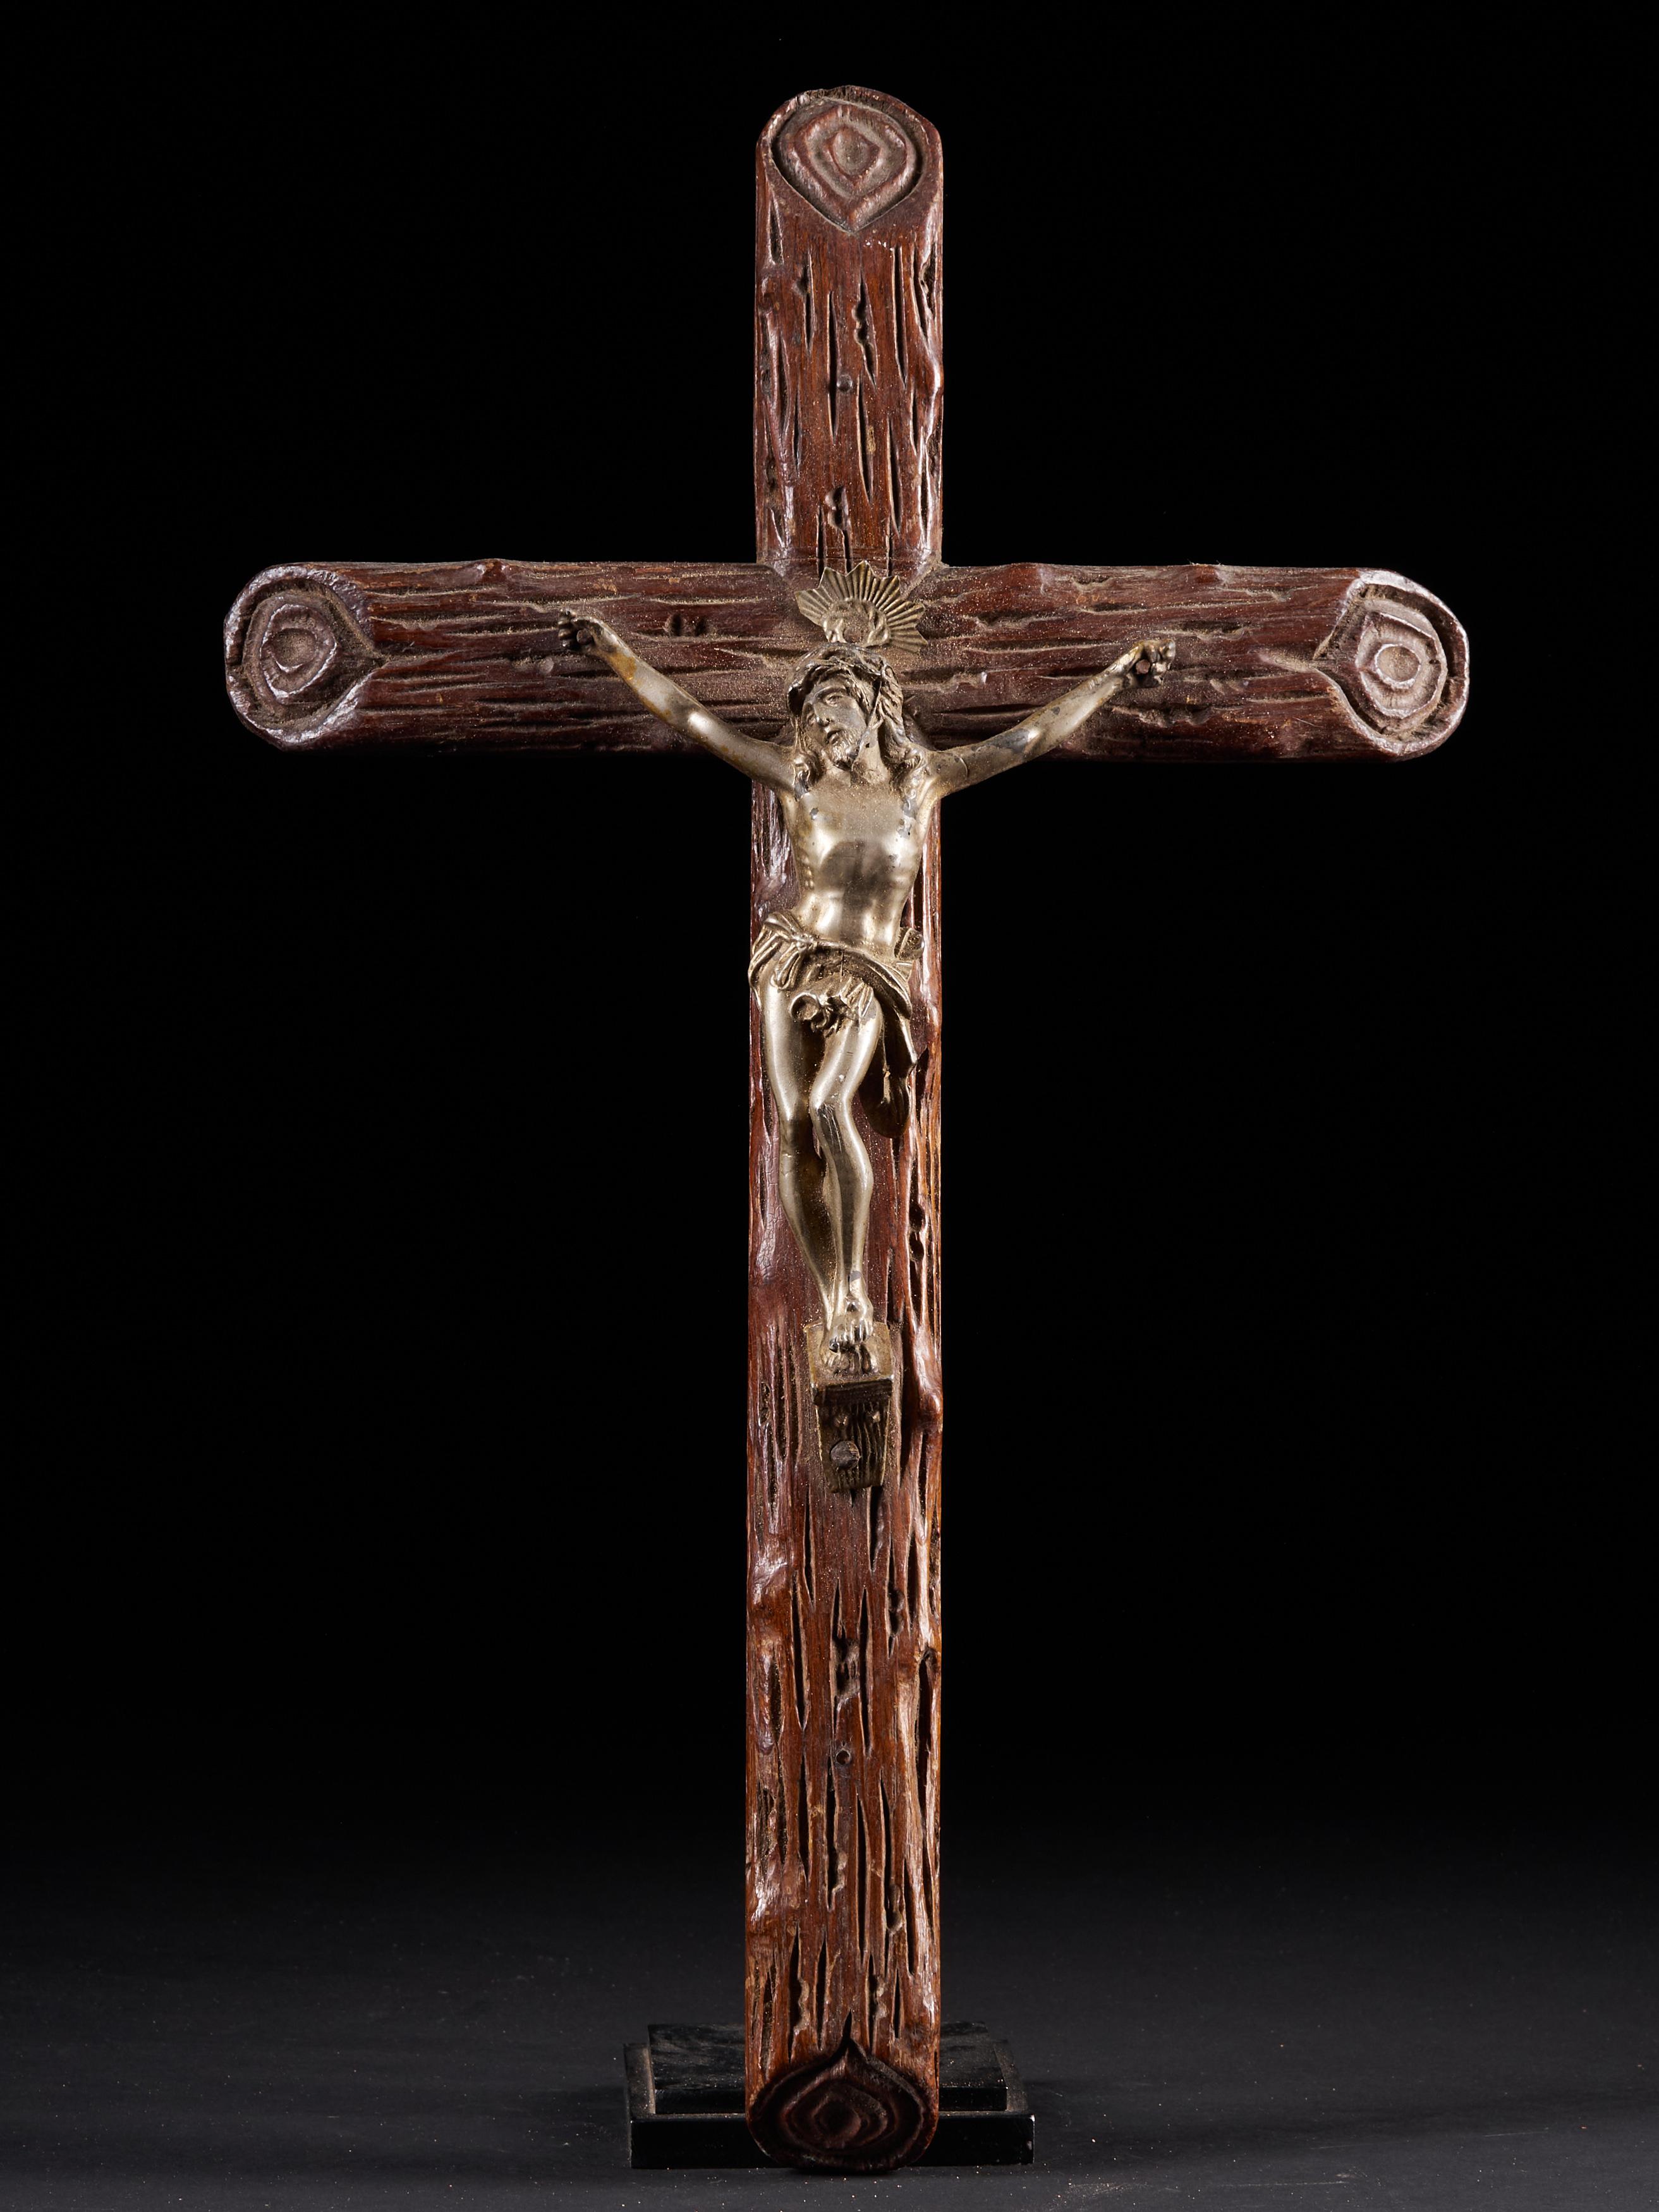 Remarkable set of 5 Christian crosses, made of wood or plaster mimicking wood, 4 of which feature a crucified Jesus made of bronze, tin and other metals. These items are in great condition and make for a compelling assortment of devotional